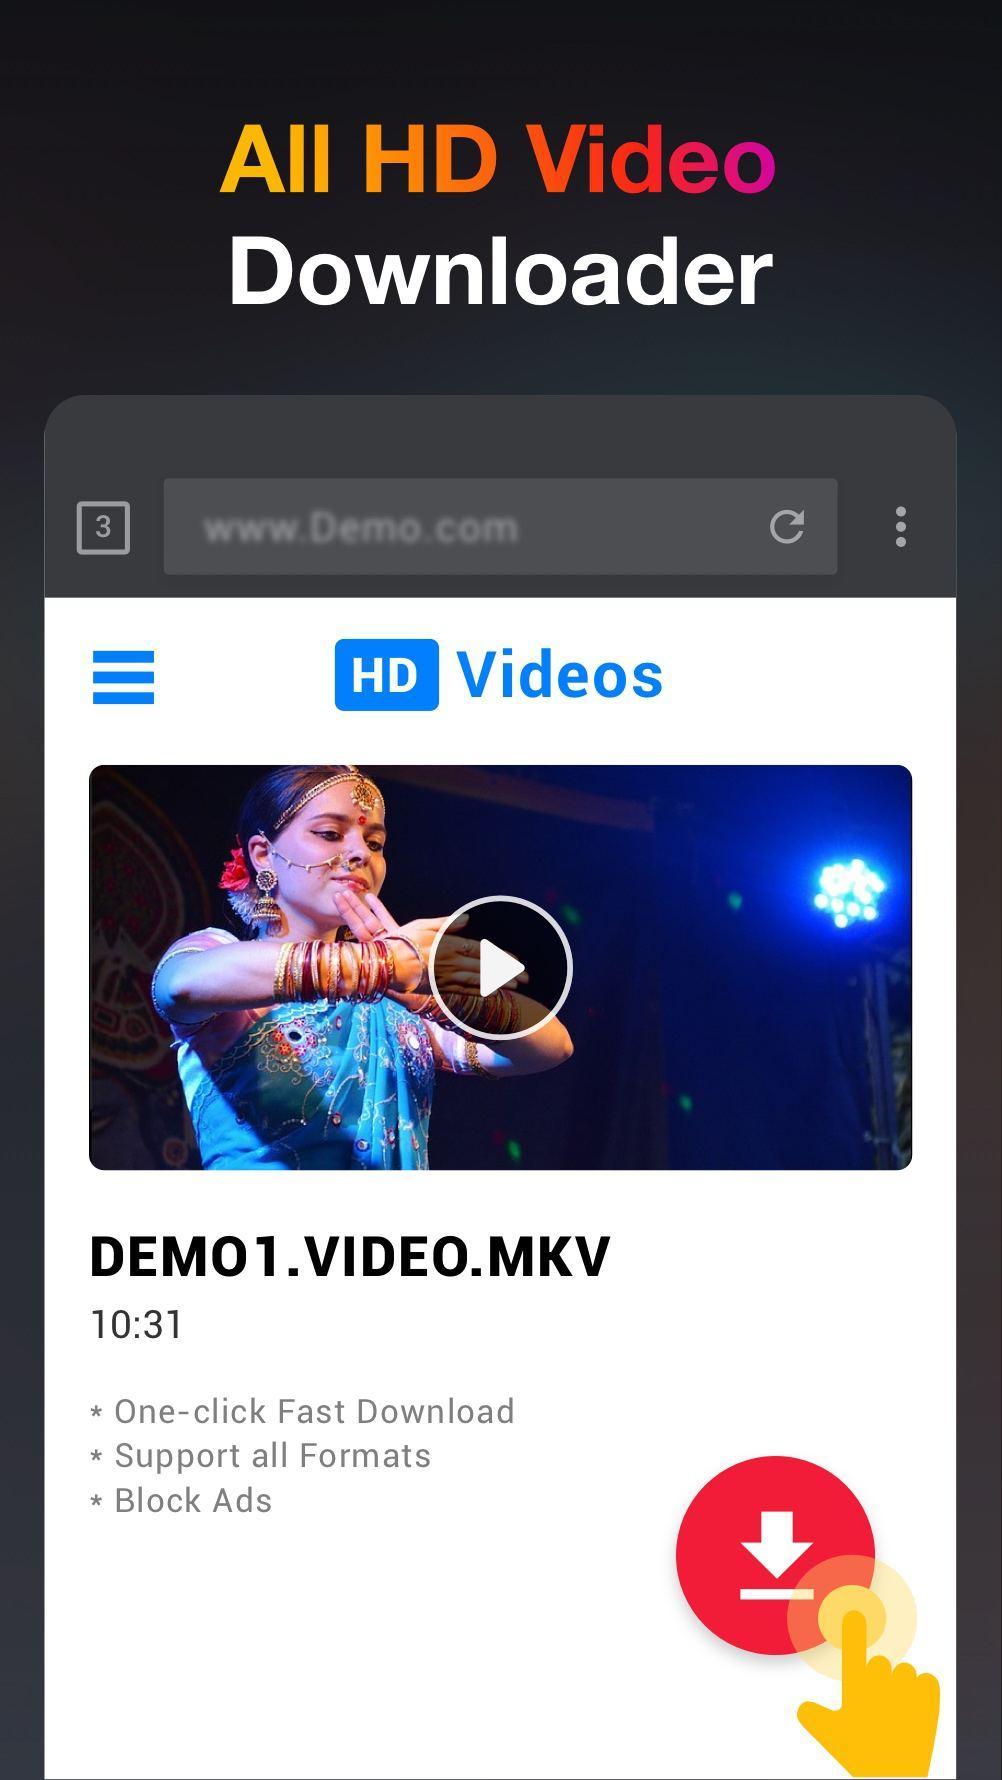 HD Video Downloader App 2019 for Android APK Download